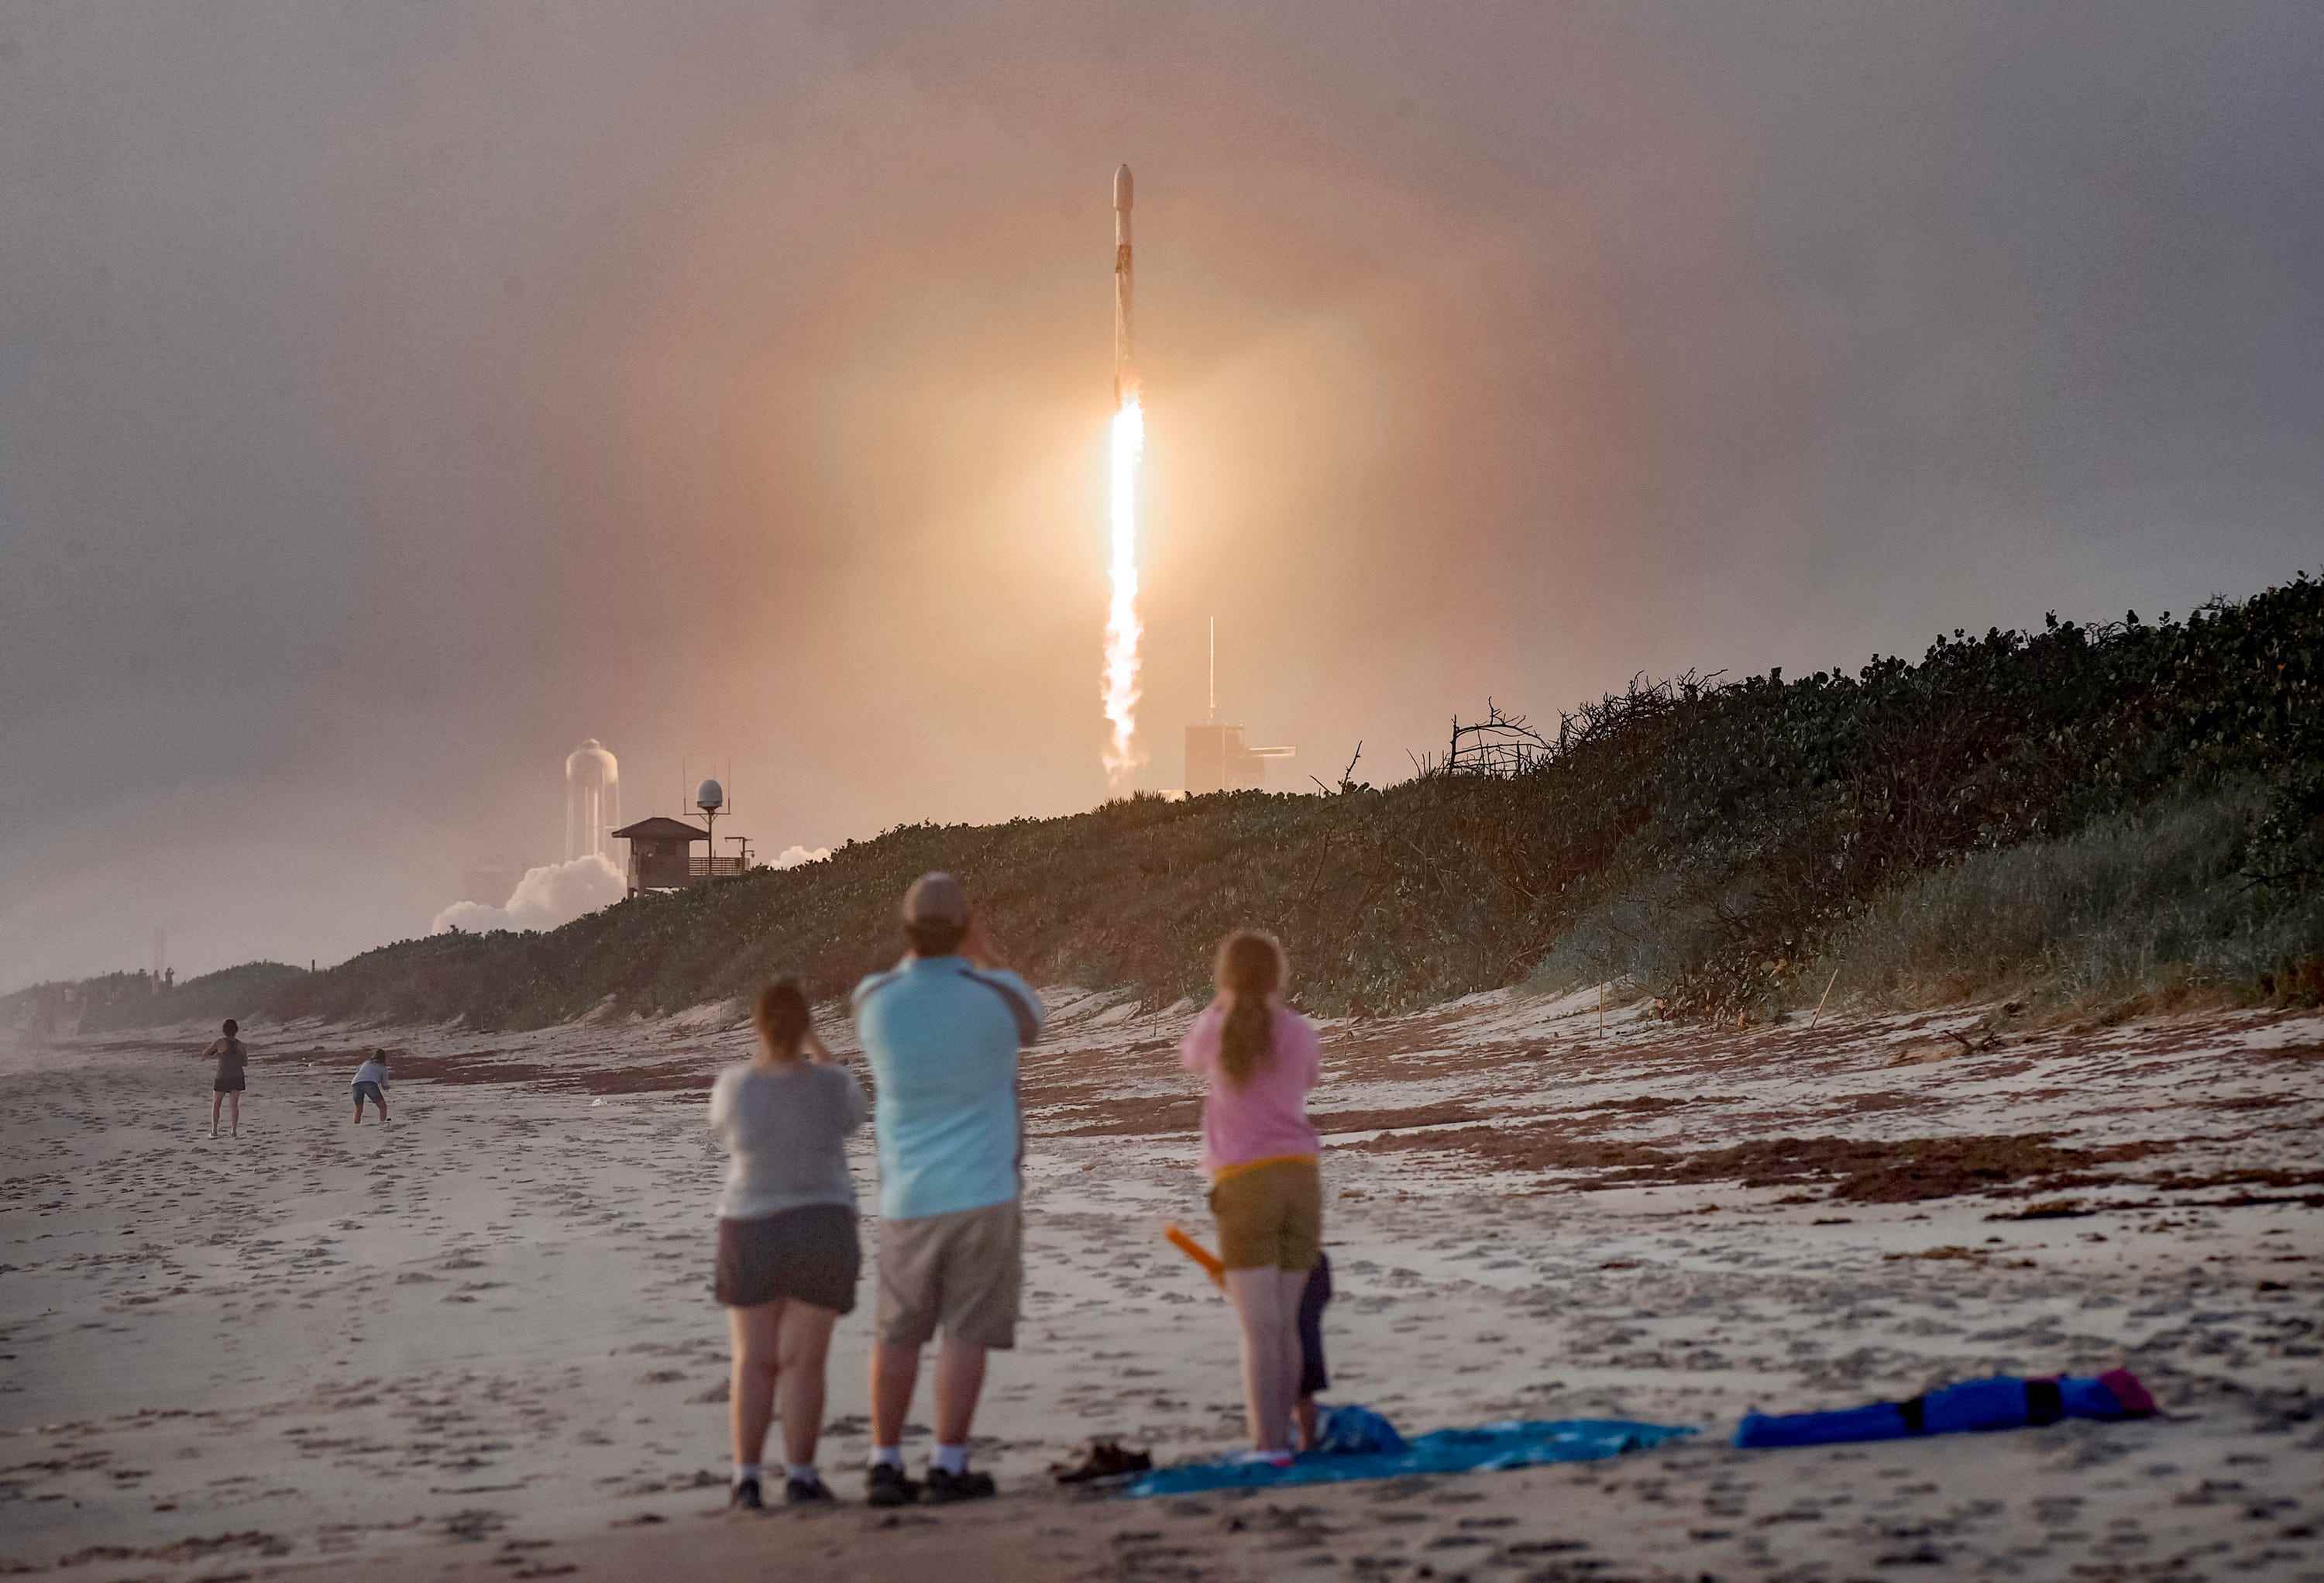 Spacex Falcon 9 Raketenstart Starlink Internet Satelliten 13. Mission Cape Canaveral Florida Strand Familie GettyImages 1228923231 edit